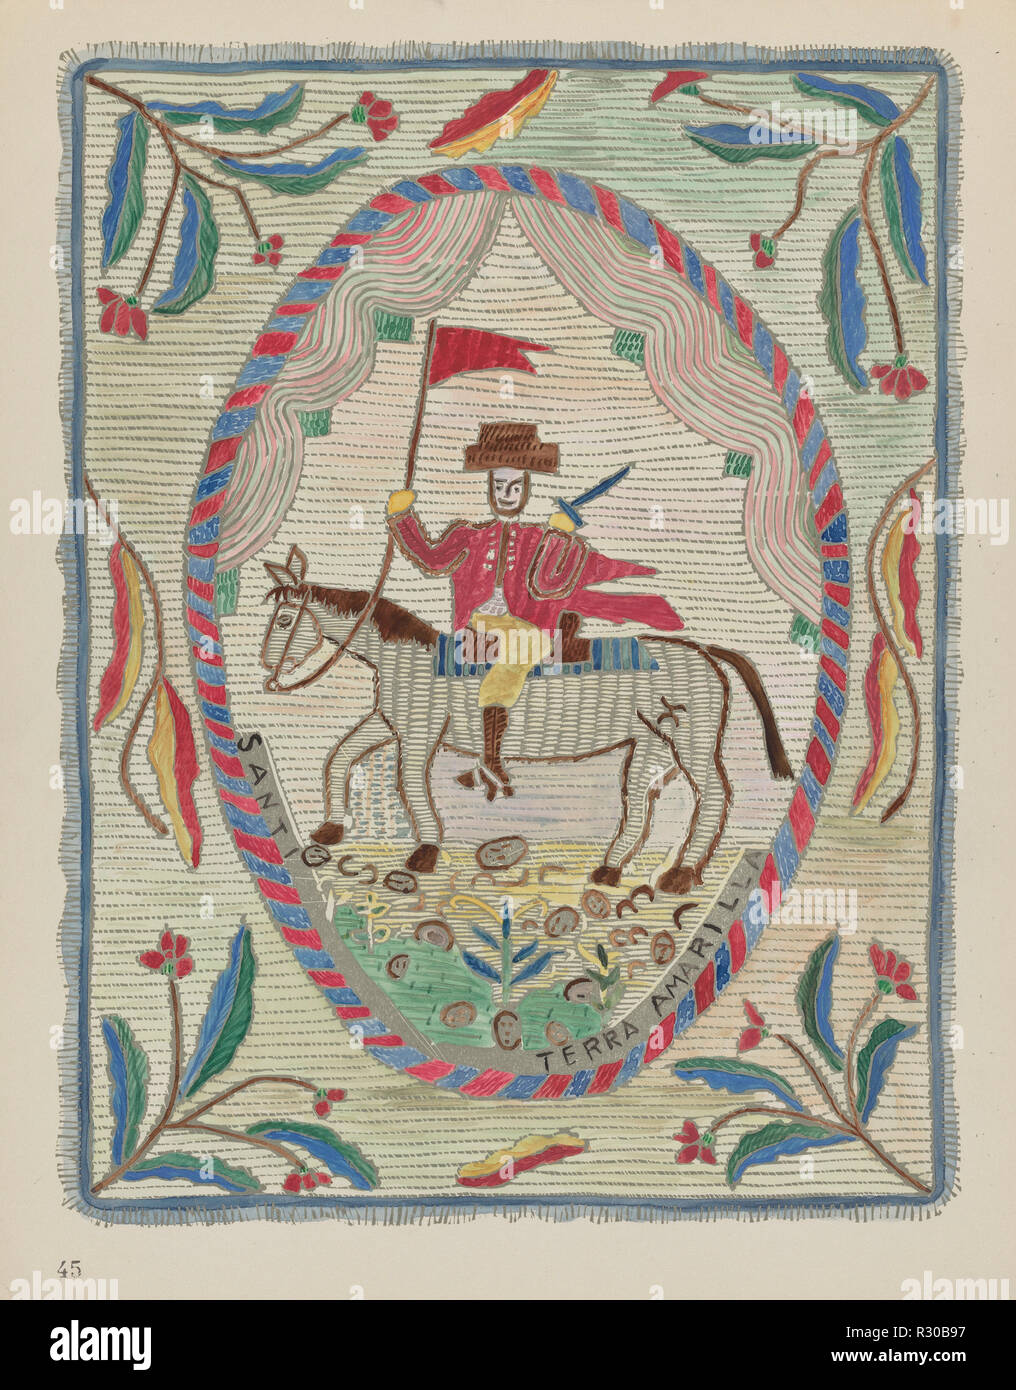 Plate 45: Embroidered Bedspread (St. James): From Portfolio 'Spanish Colonial Designs of New Mexico'. Dated: 1935/1942. Dimensions: overall: 35.6 x 20.8 cm (14 x 8 3/16 in.). Medium: screenprint on paper. Museum: National Gallery of Art, Washington DC. Author: American 20th Century. Stock Photo